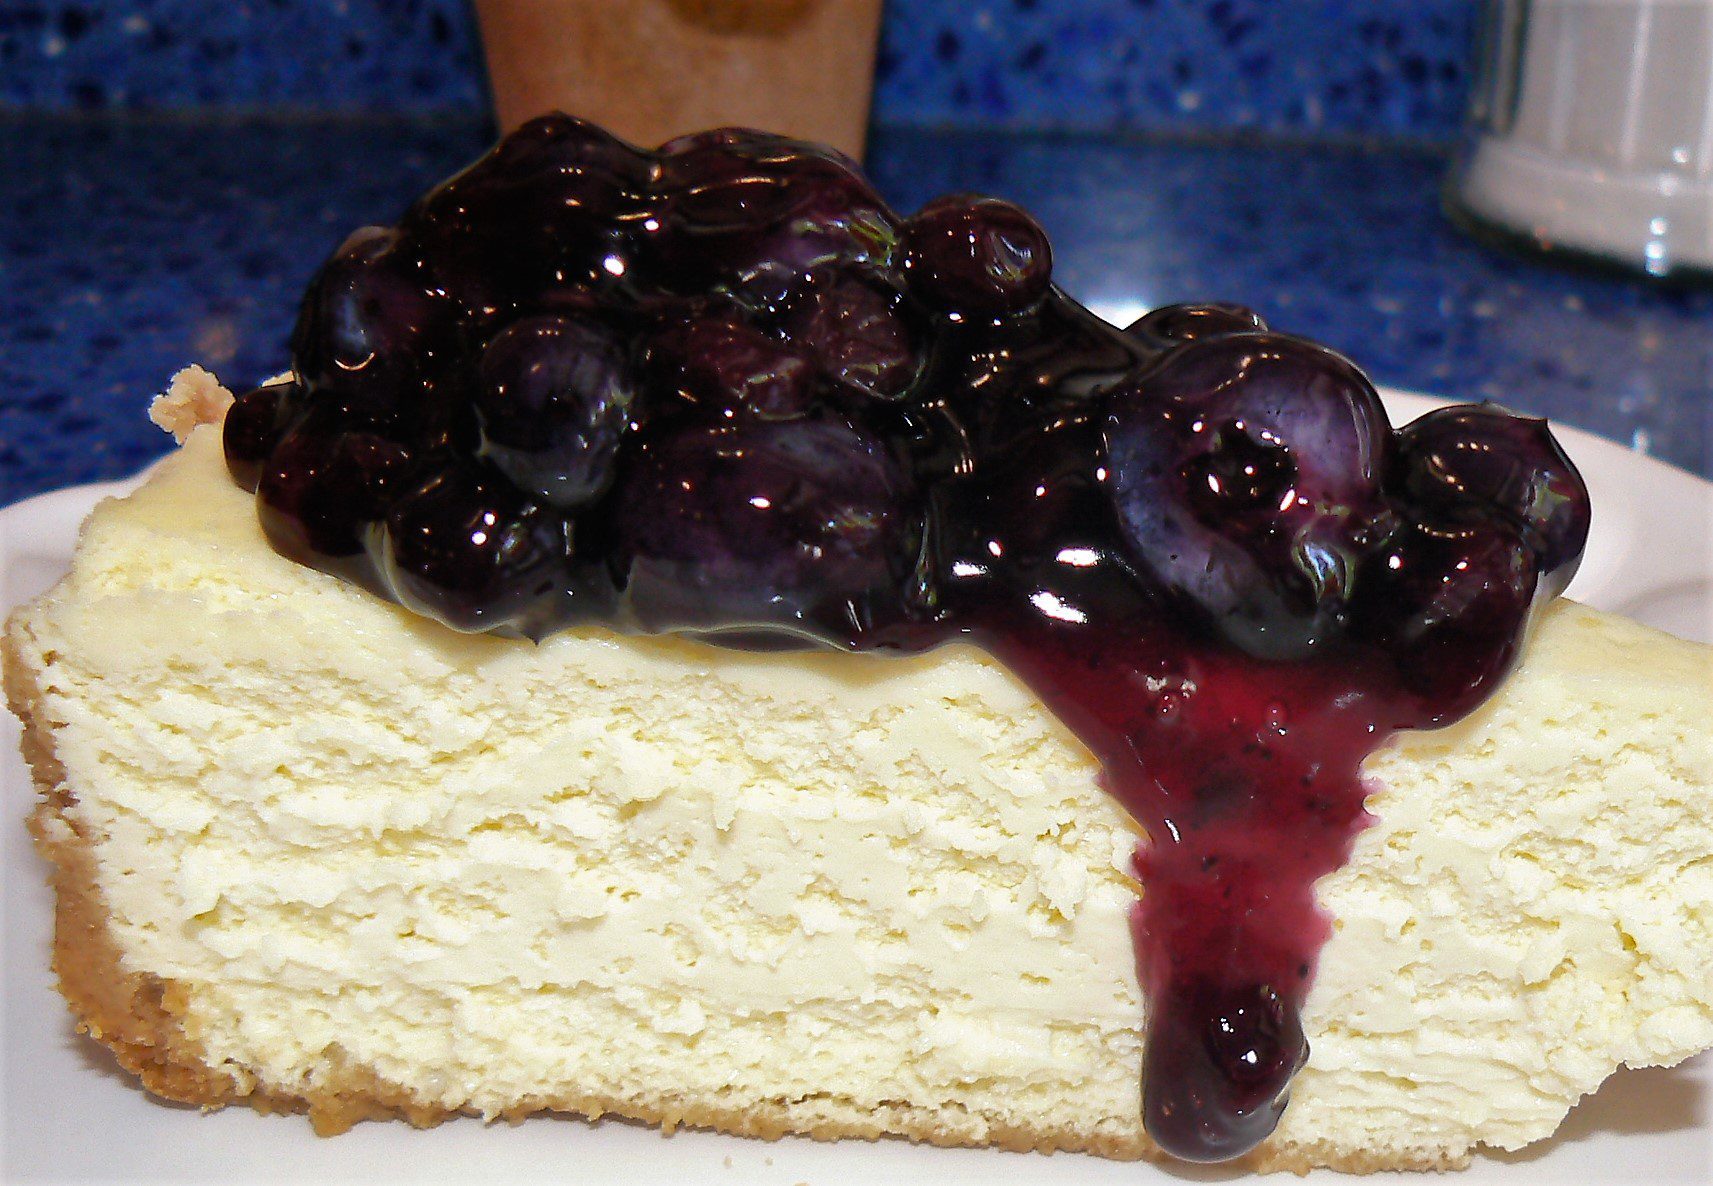 Blueberry topped cheesecake